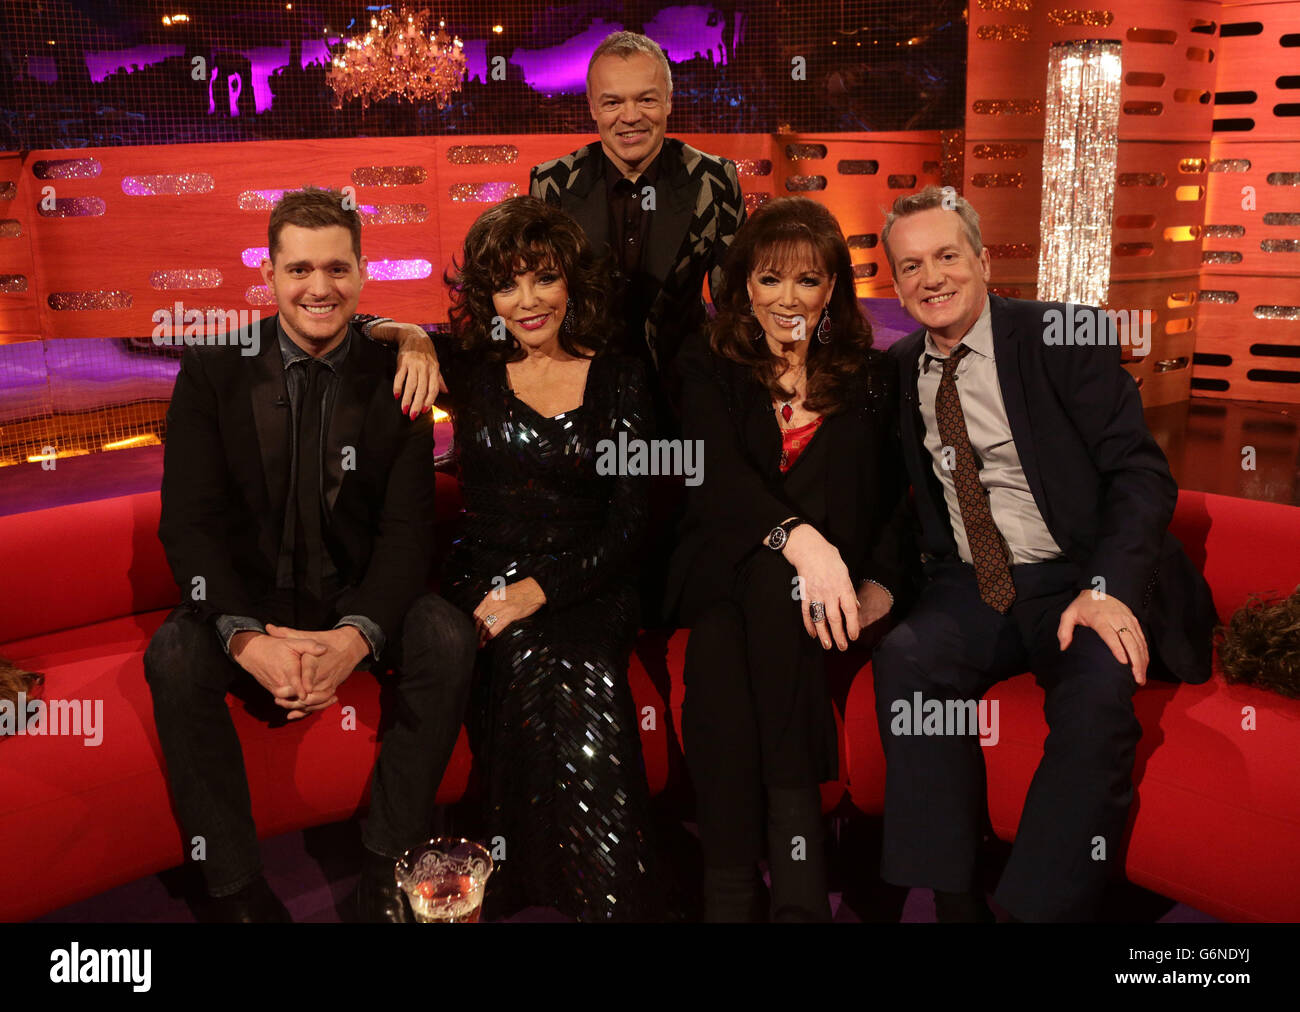 Michael Buble, Joan Collins, Graham Norton, Jackie Collins and Frank Skinner during the filming of the New Year's Eve Graham Norton Show, at The London Studios, south London, to be aired on BBC One on Tuesday evening. Stock Photo